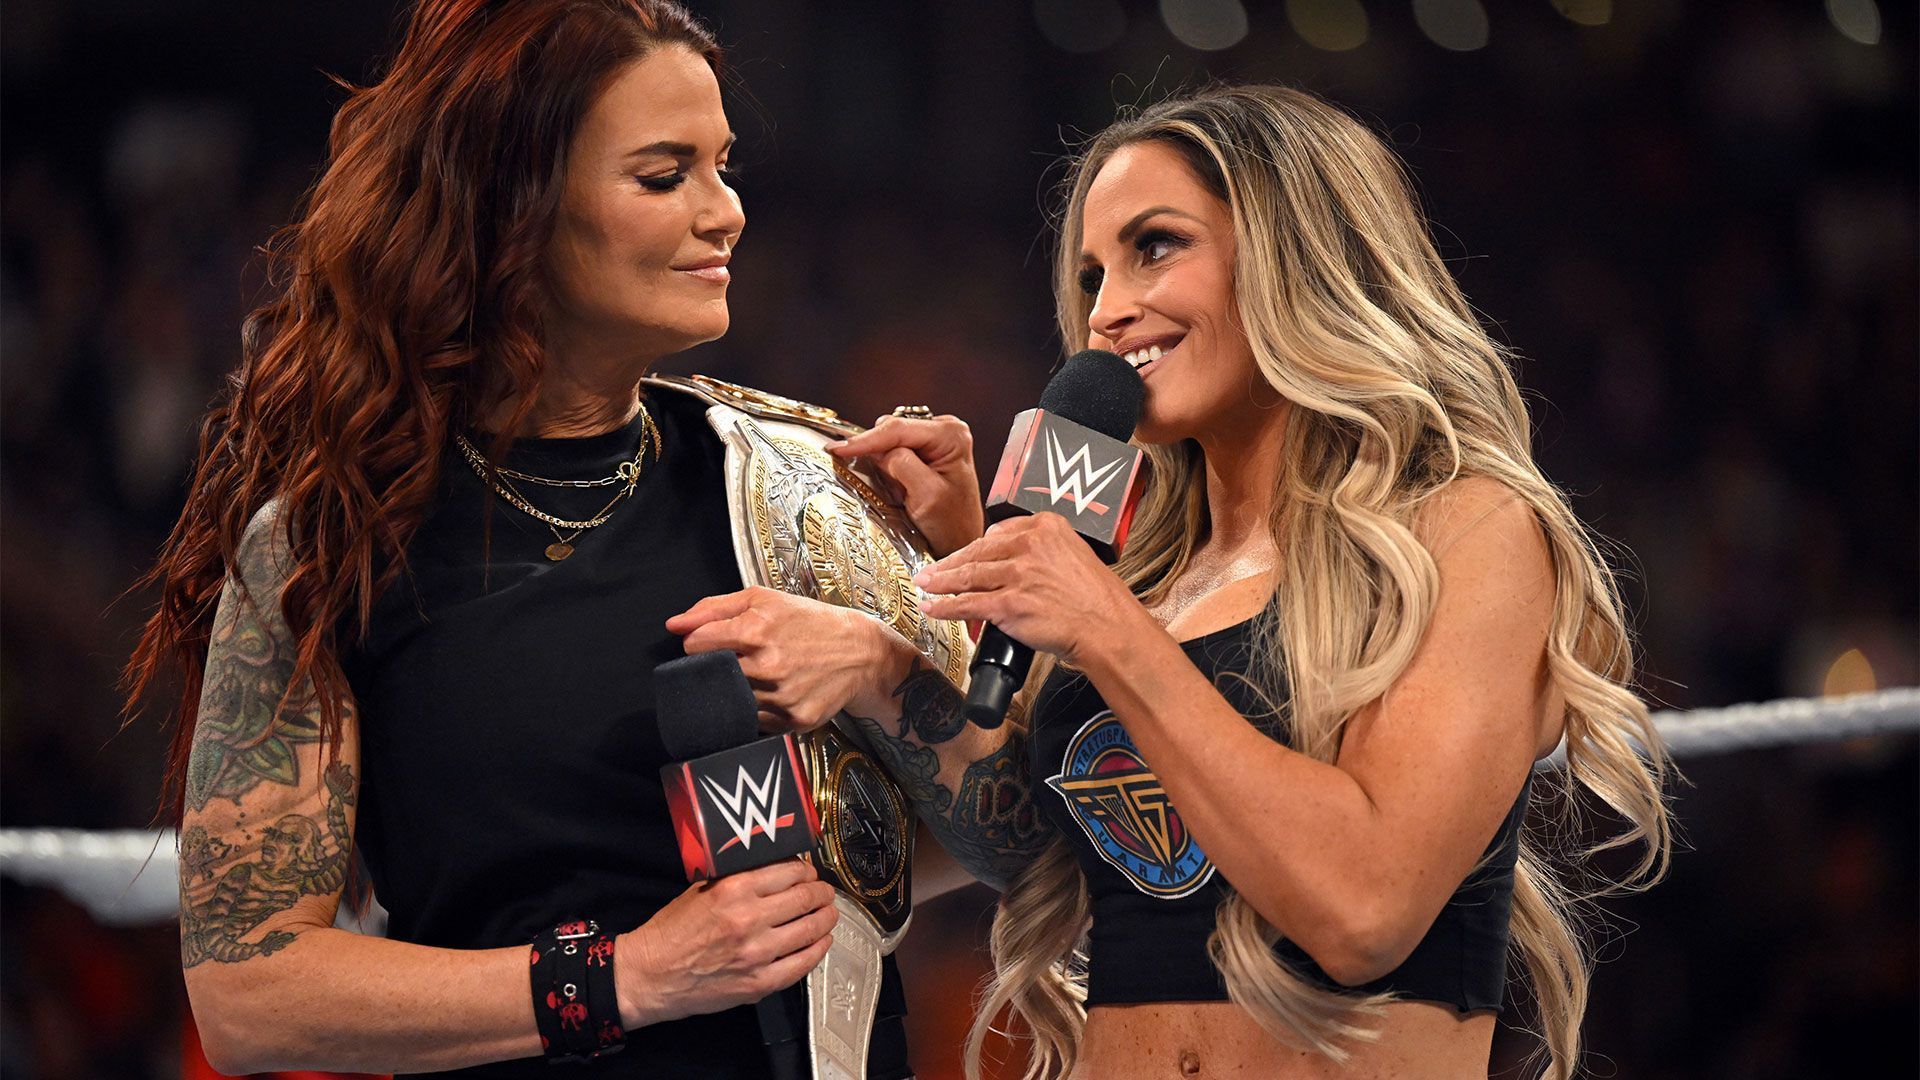 Trish Stratus and Lita are two of WWE